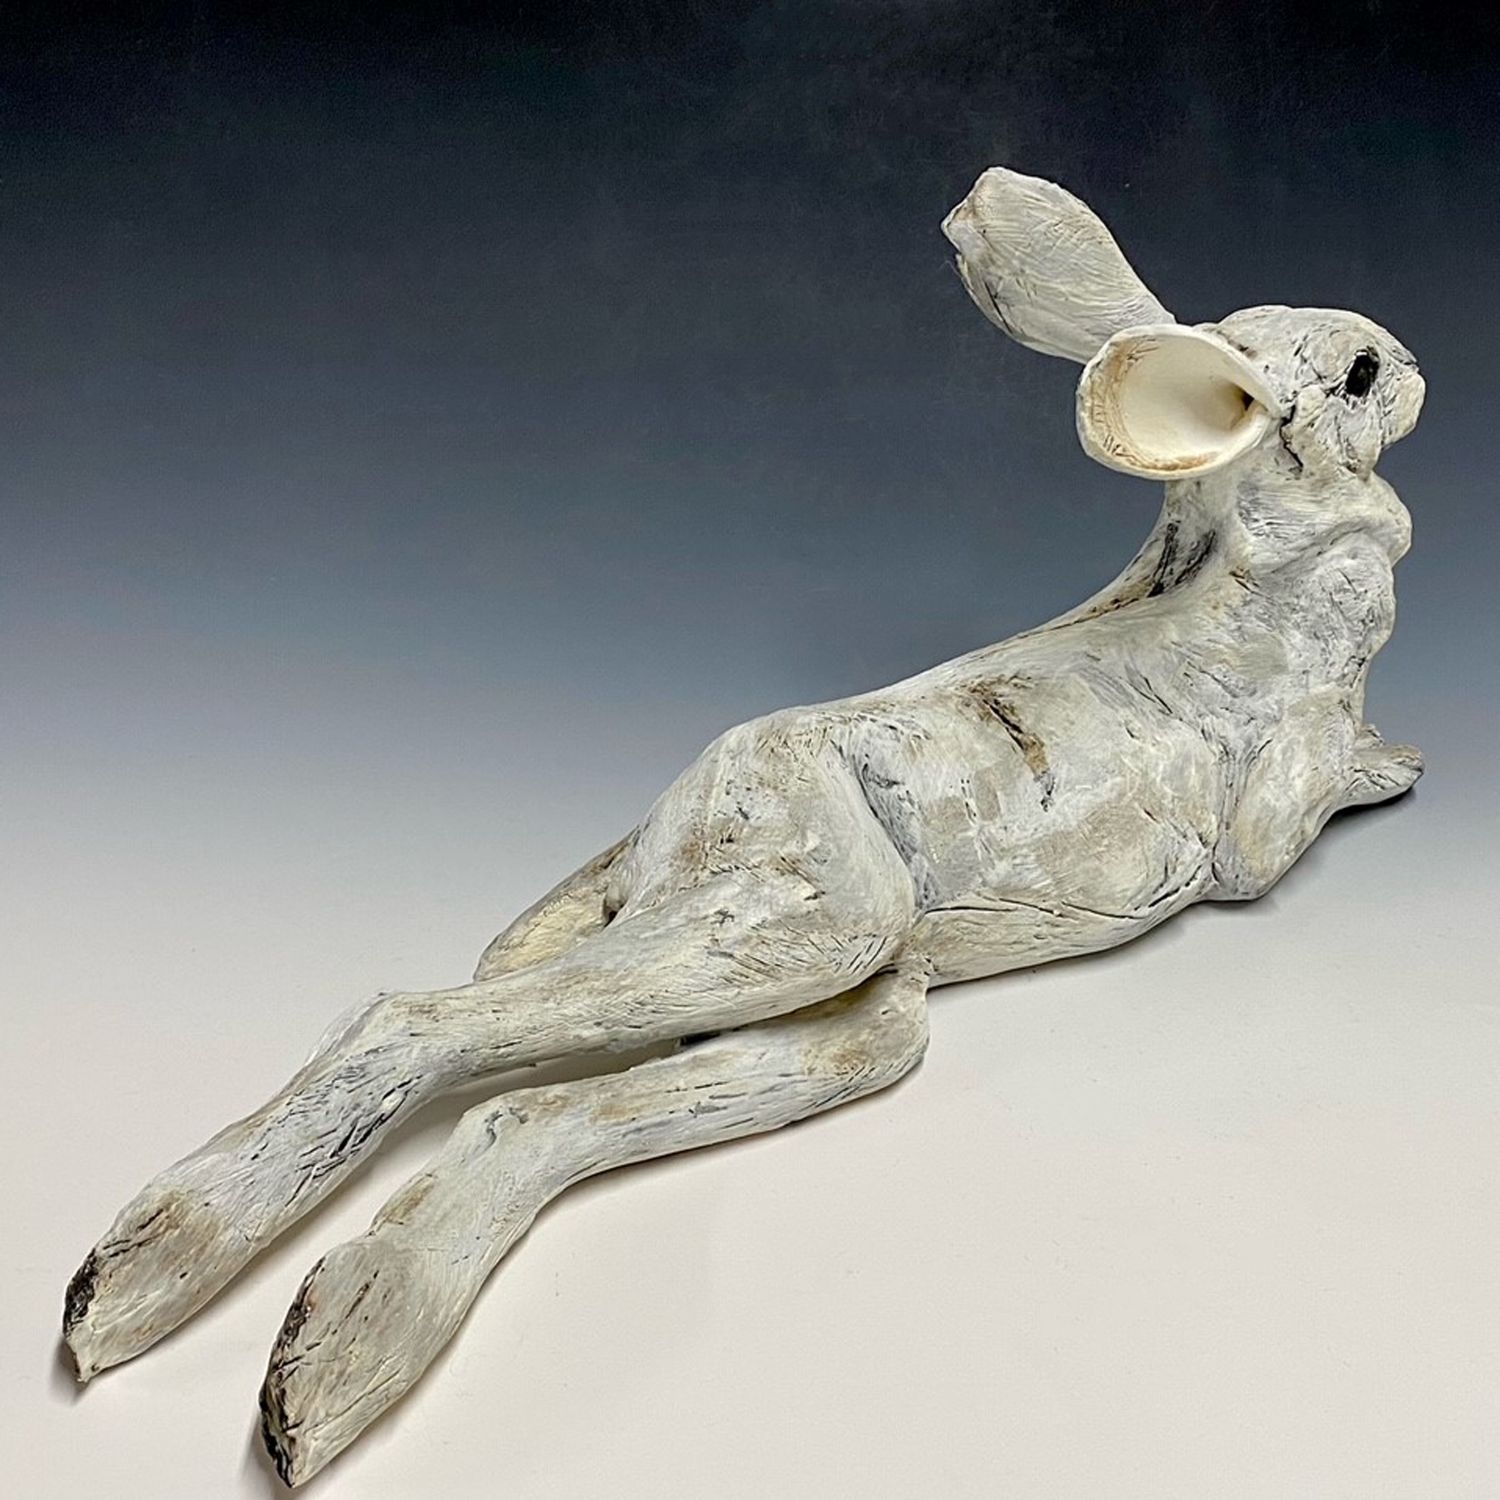 Mary Philpott: Reclining Hare Product Image 2 of 2